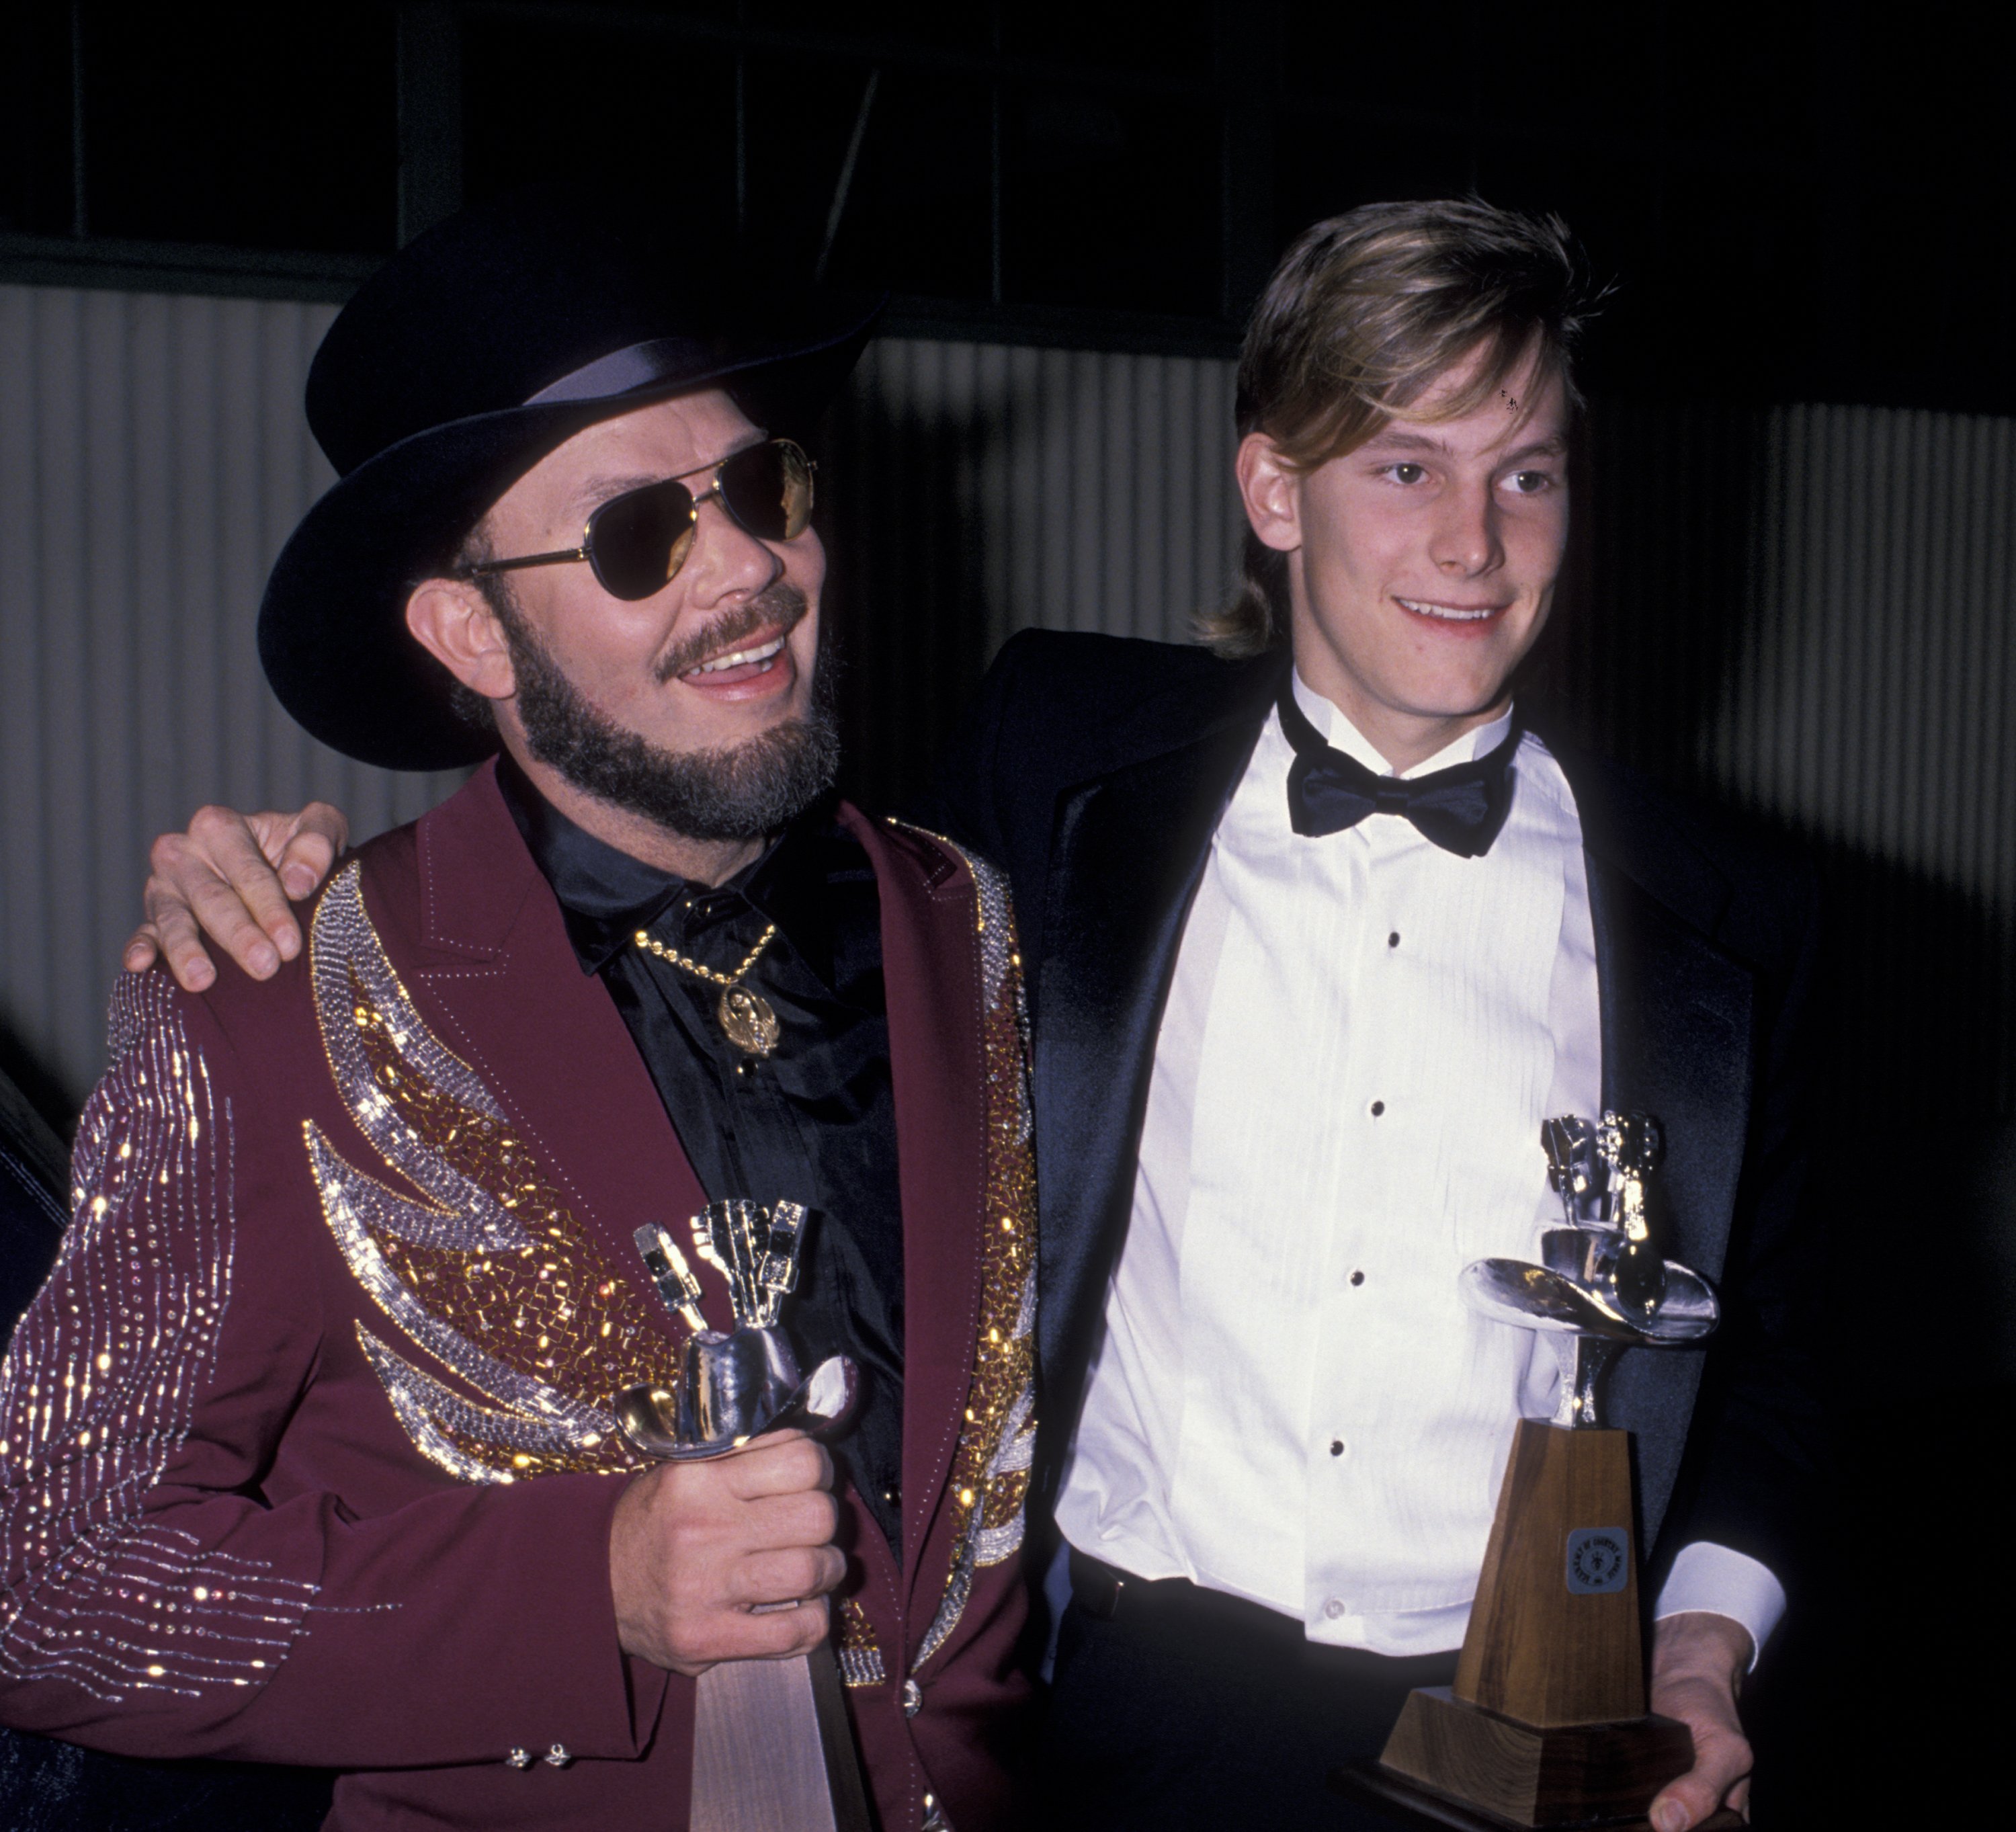 Hank Williams Jr. and Shelton Hank Williams III at the 24th Annual Academy of Country Music Awards on April 10, 1989, in Burbank, California. | Source: Getty Images